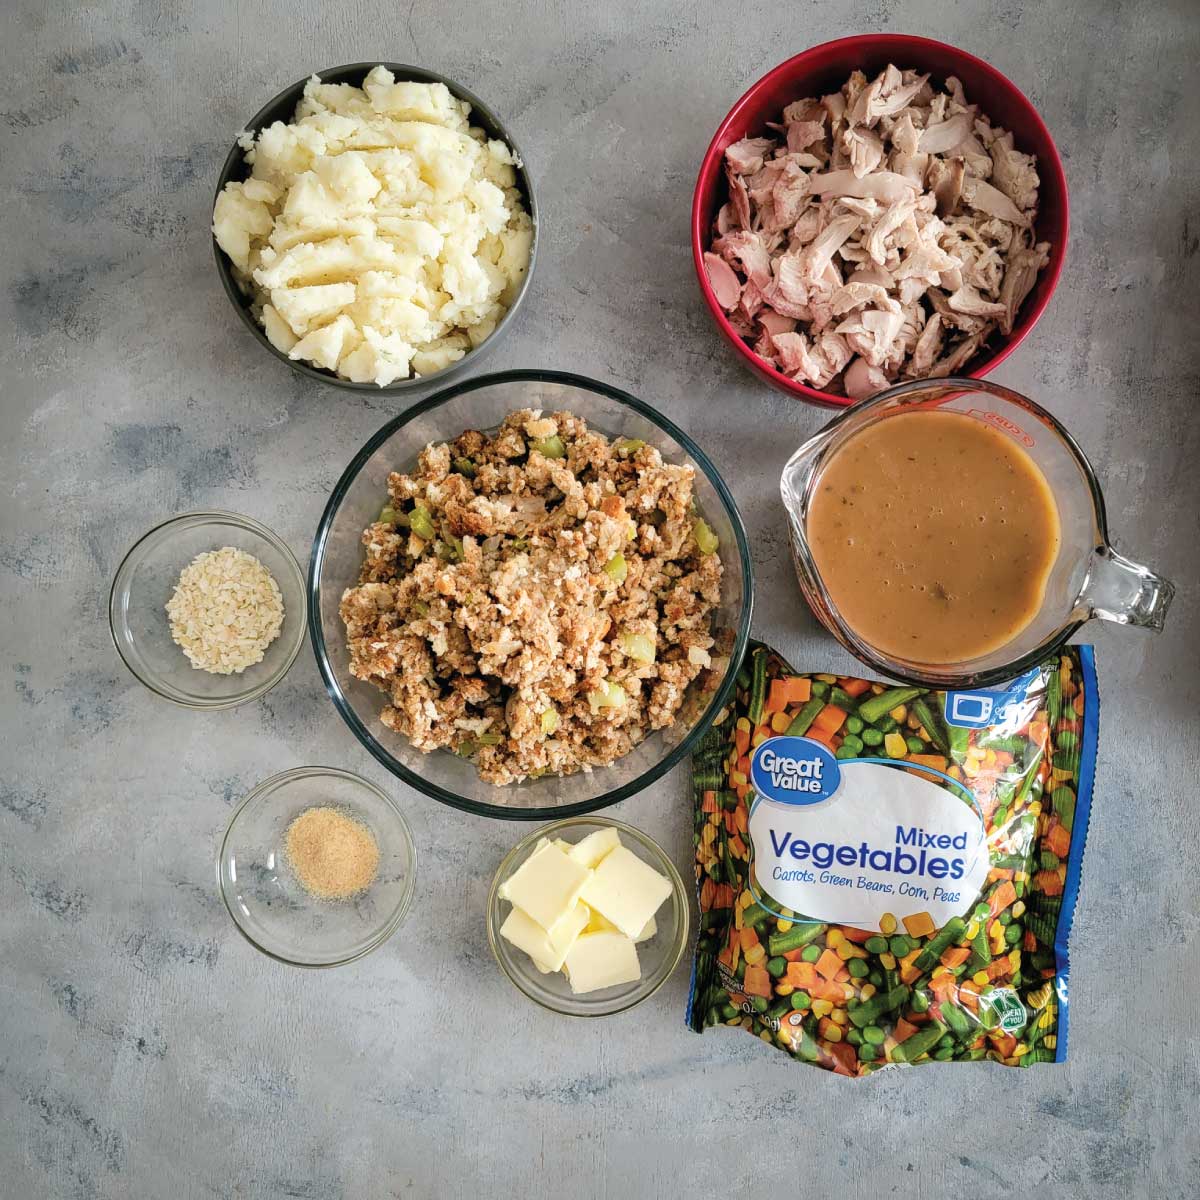 Ingredients for casserole - mixed vegetables, butter, garlic powder, dried minced onion, stuffing, gravy, turkey, and mashed potatoes.